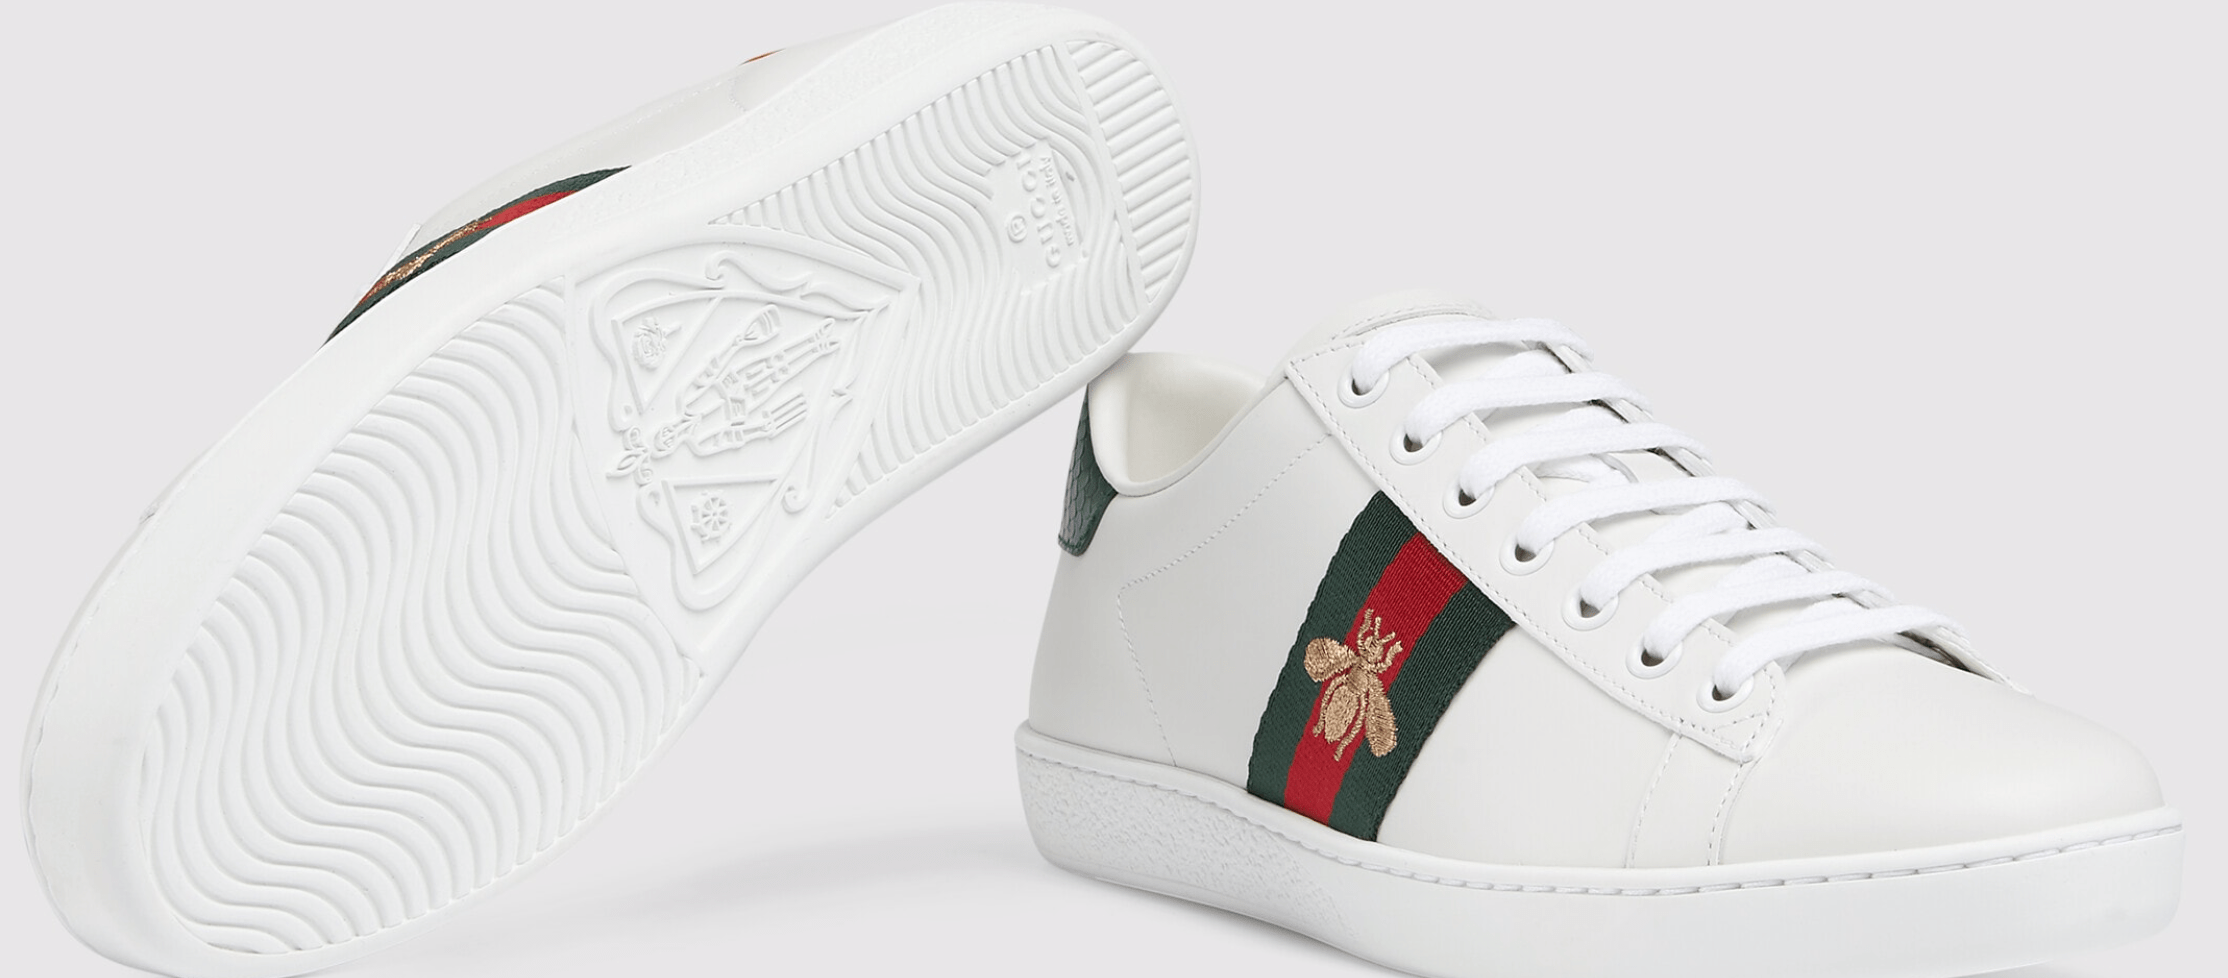 Where To Buy Gucci Sneakers On Sale - The Blonde Side